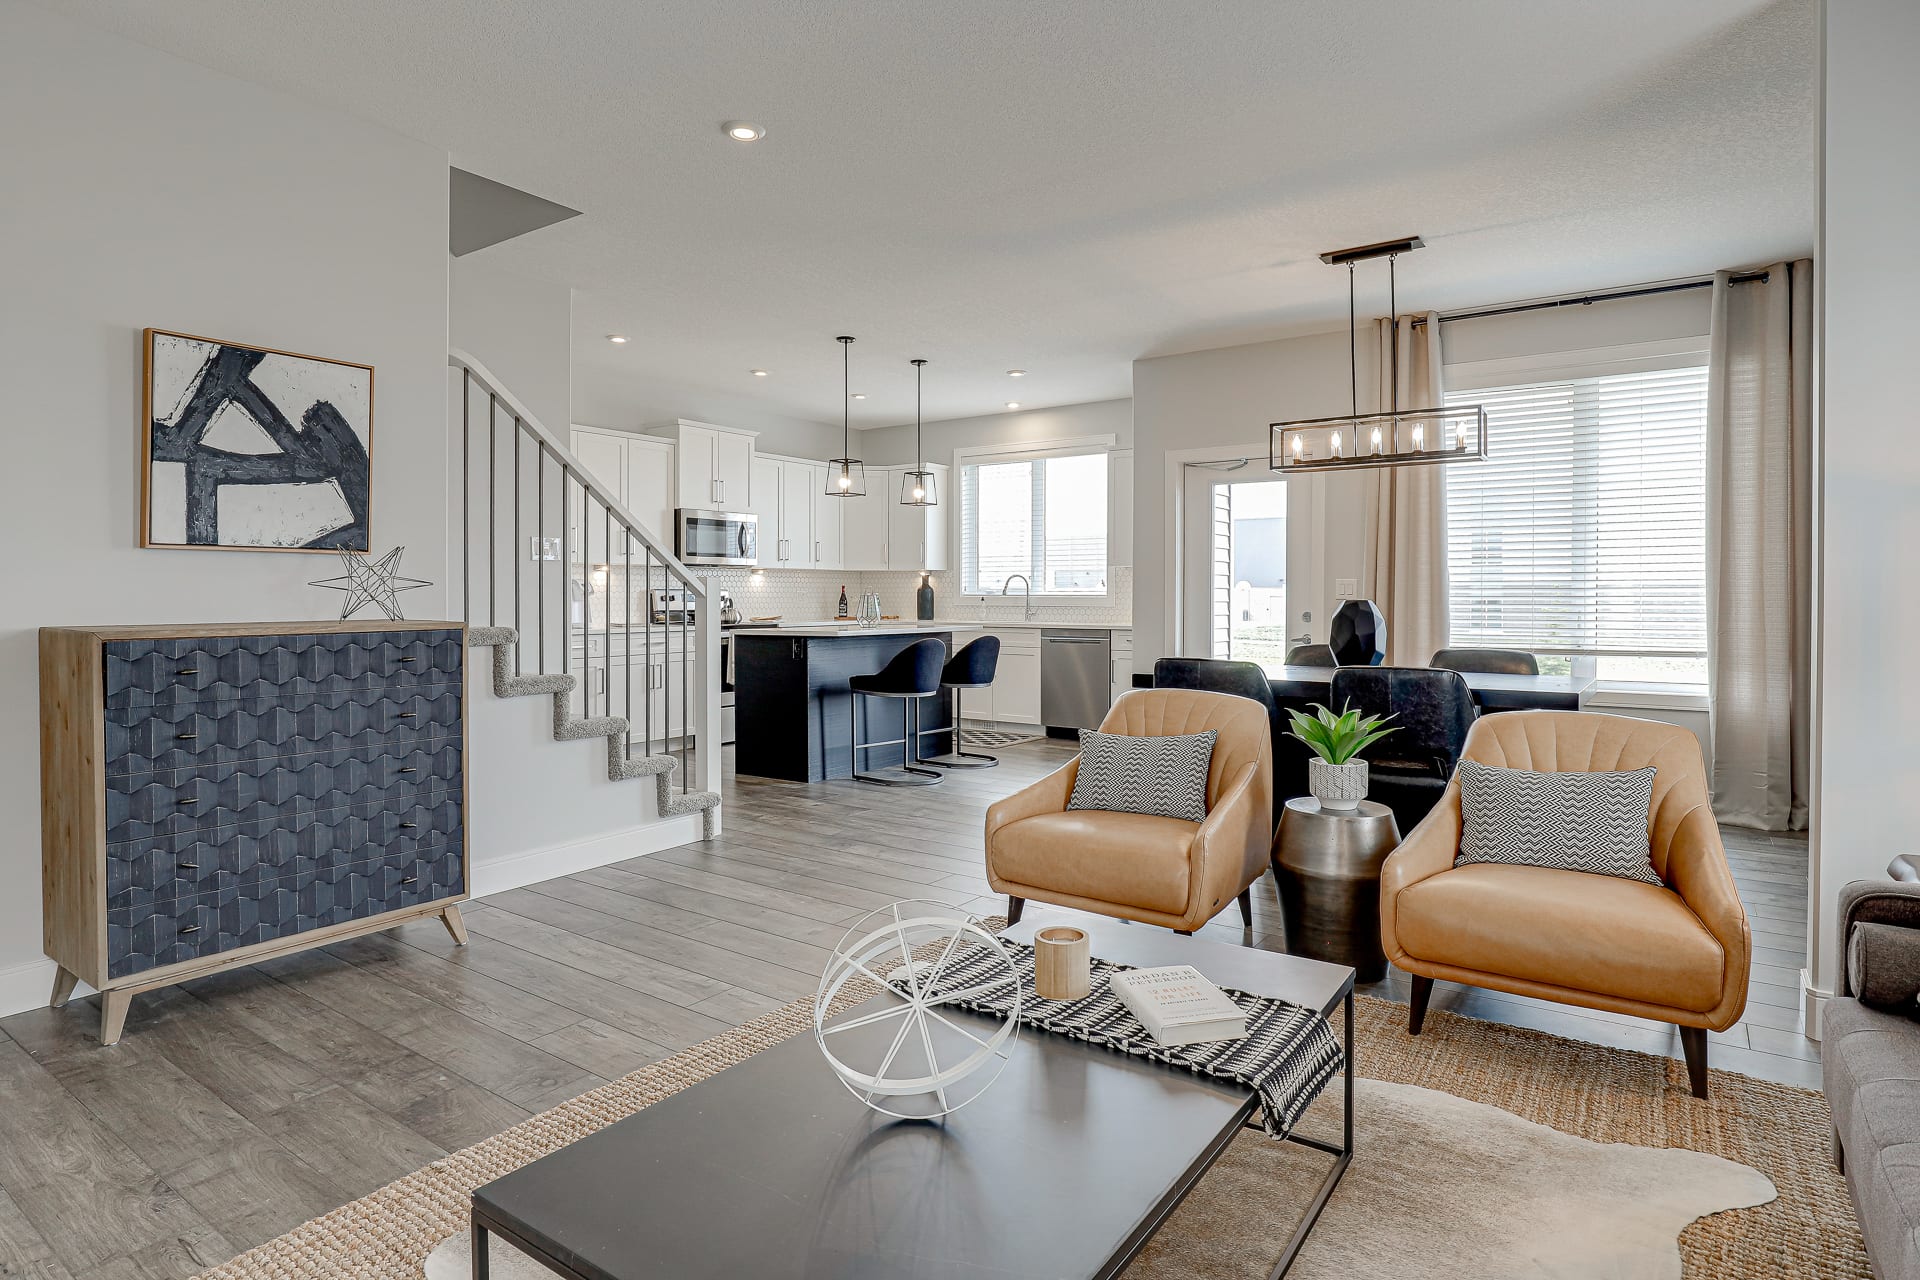 New Homes for Sale in Saskatoon and Area